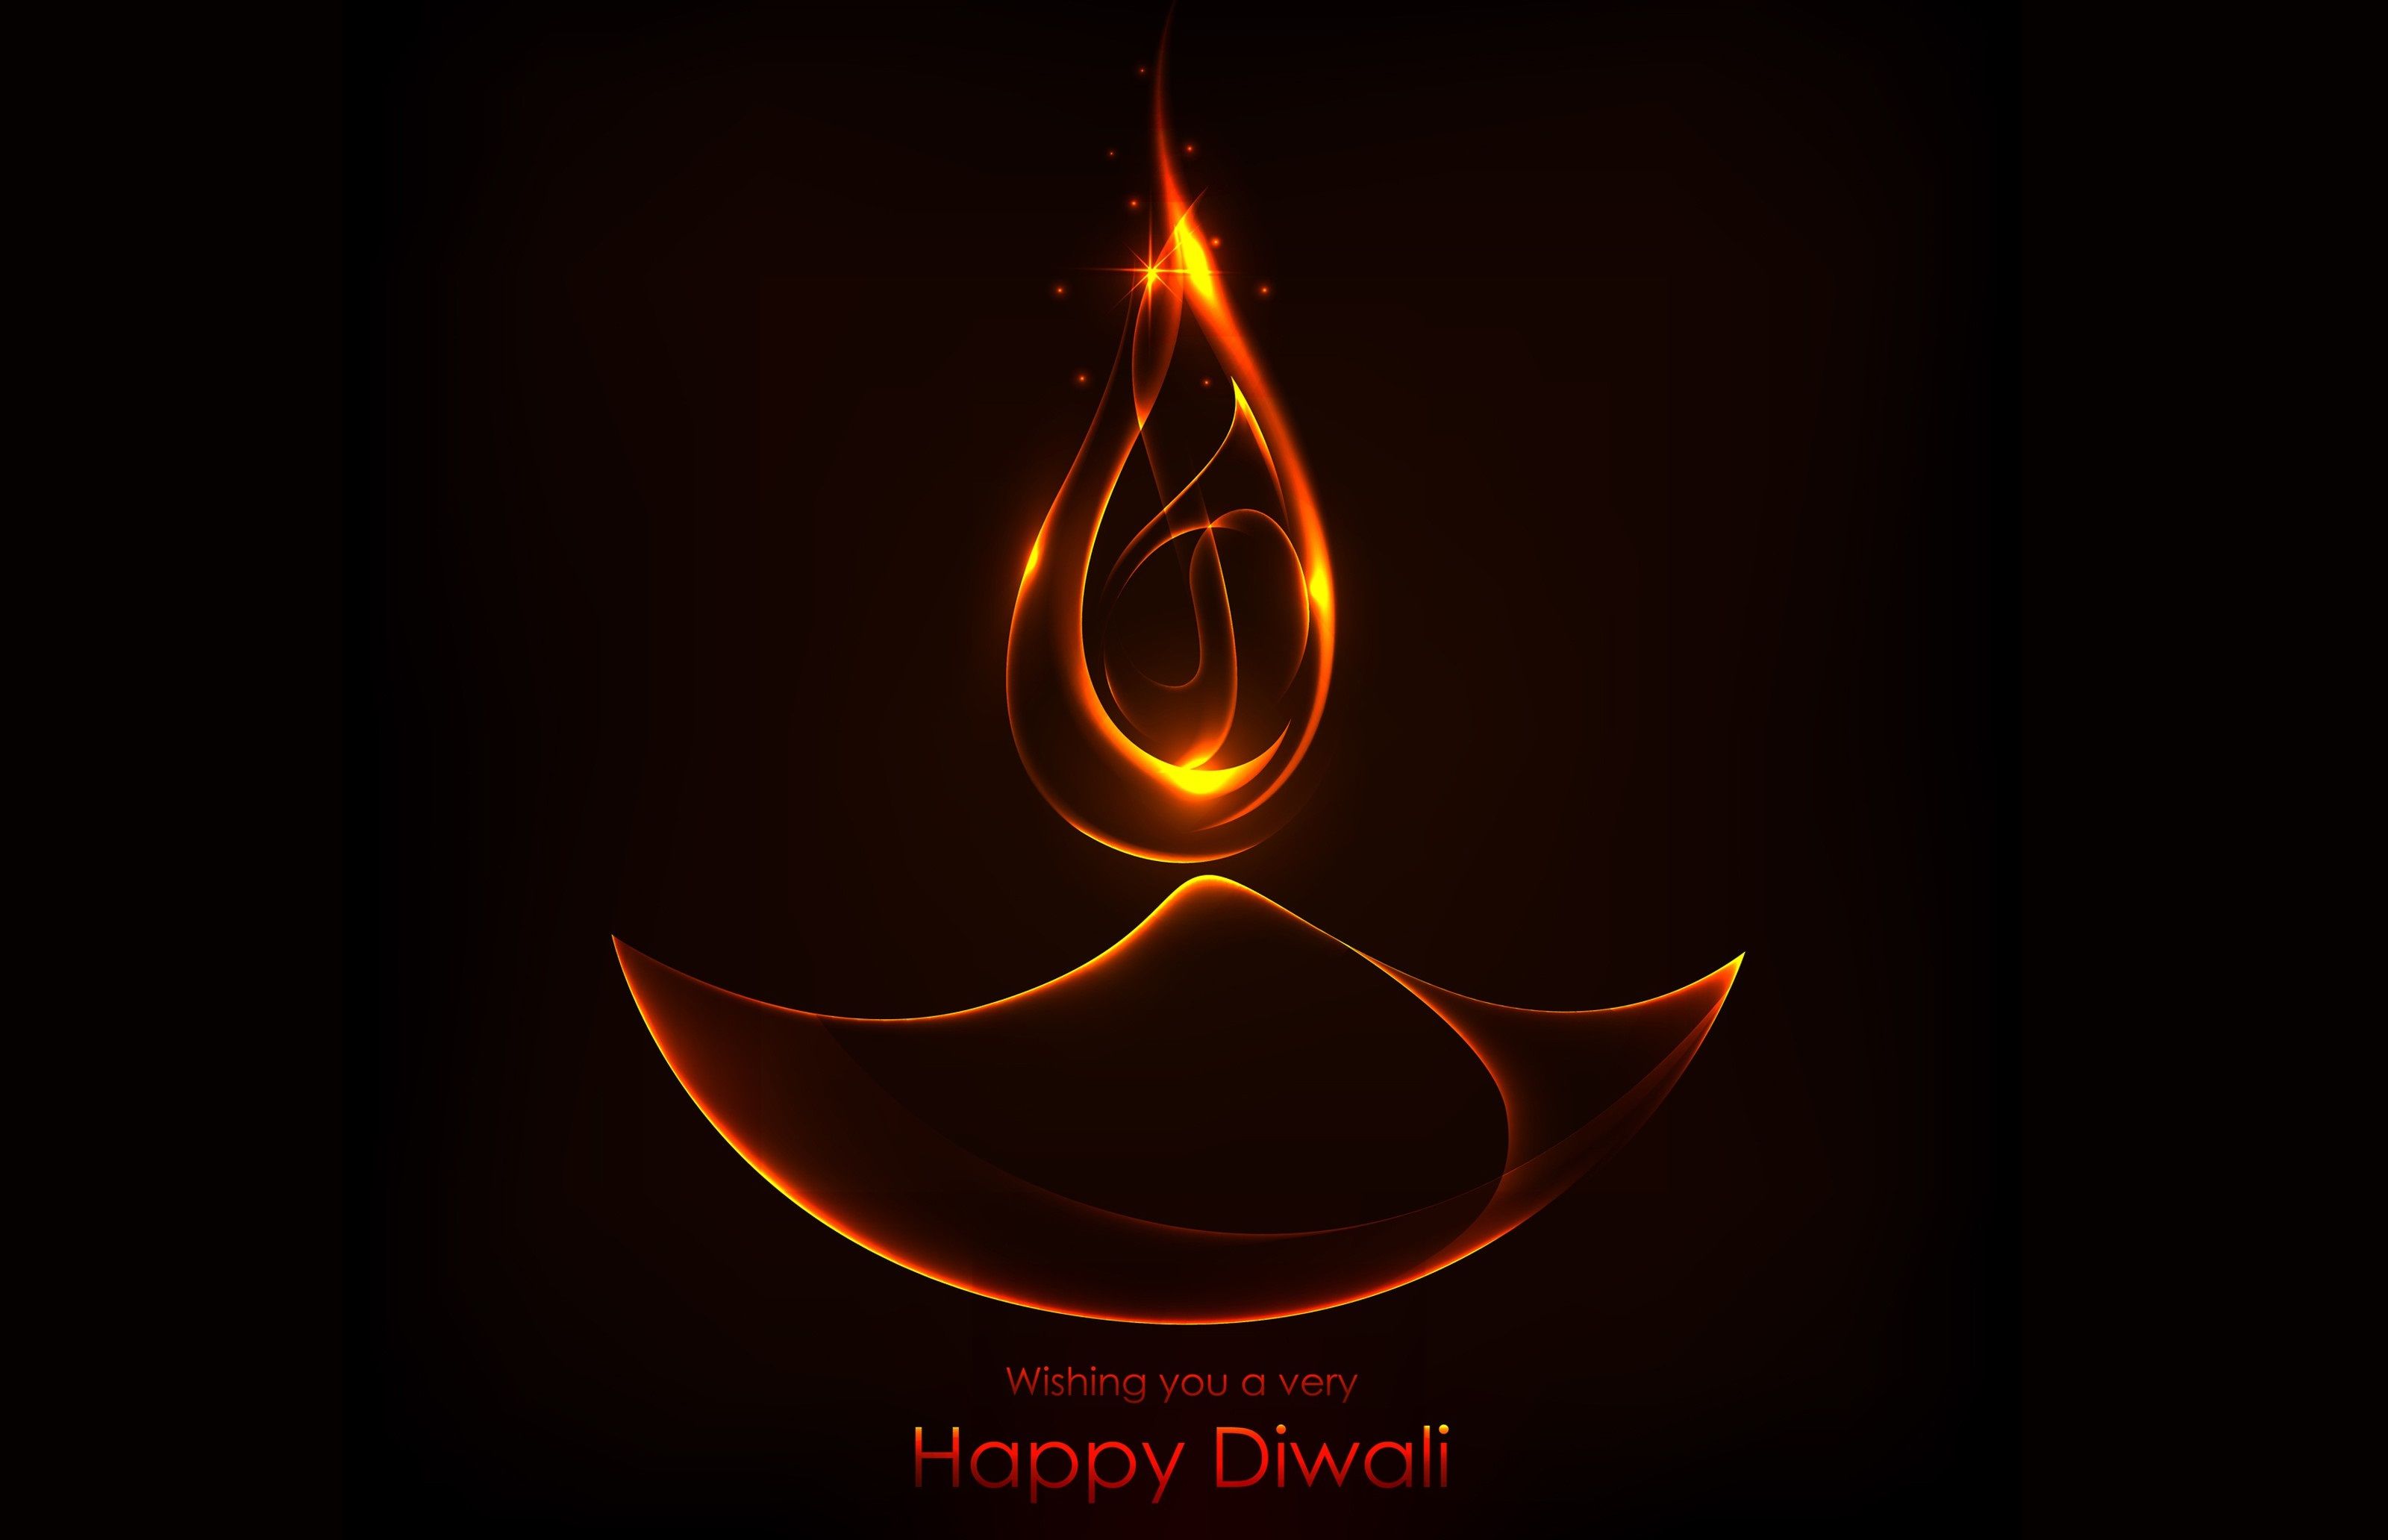 New Diwali Superb And Awesome HD Wallpapers For Desktop, Laptop ...